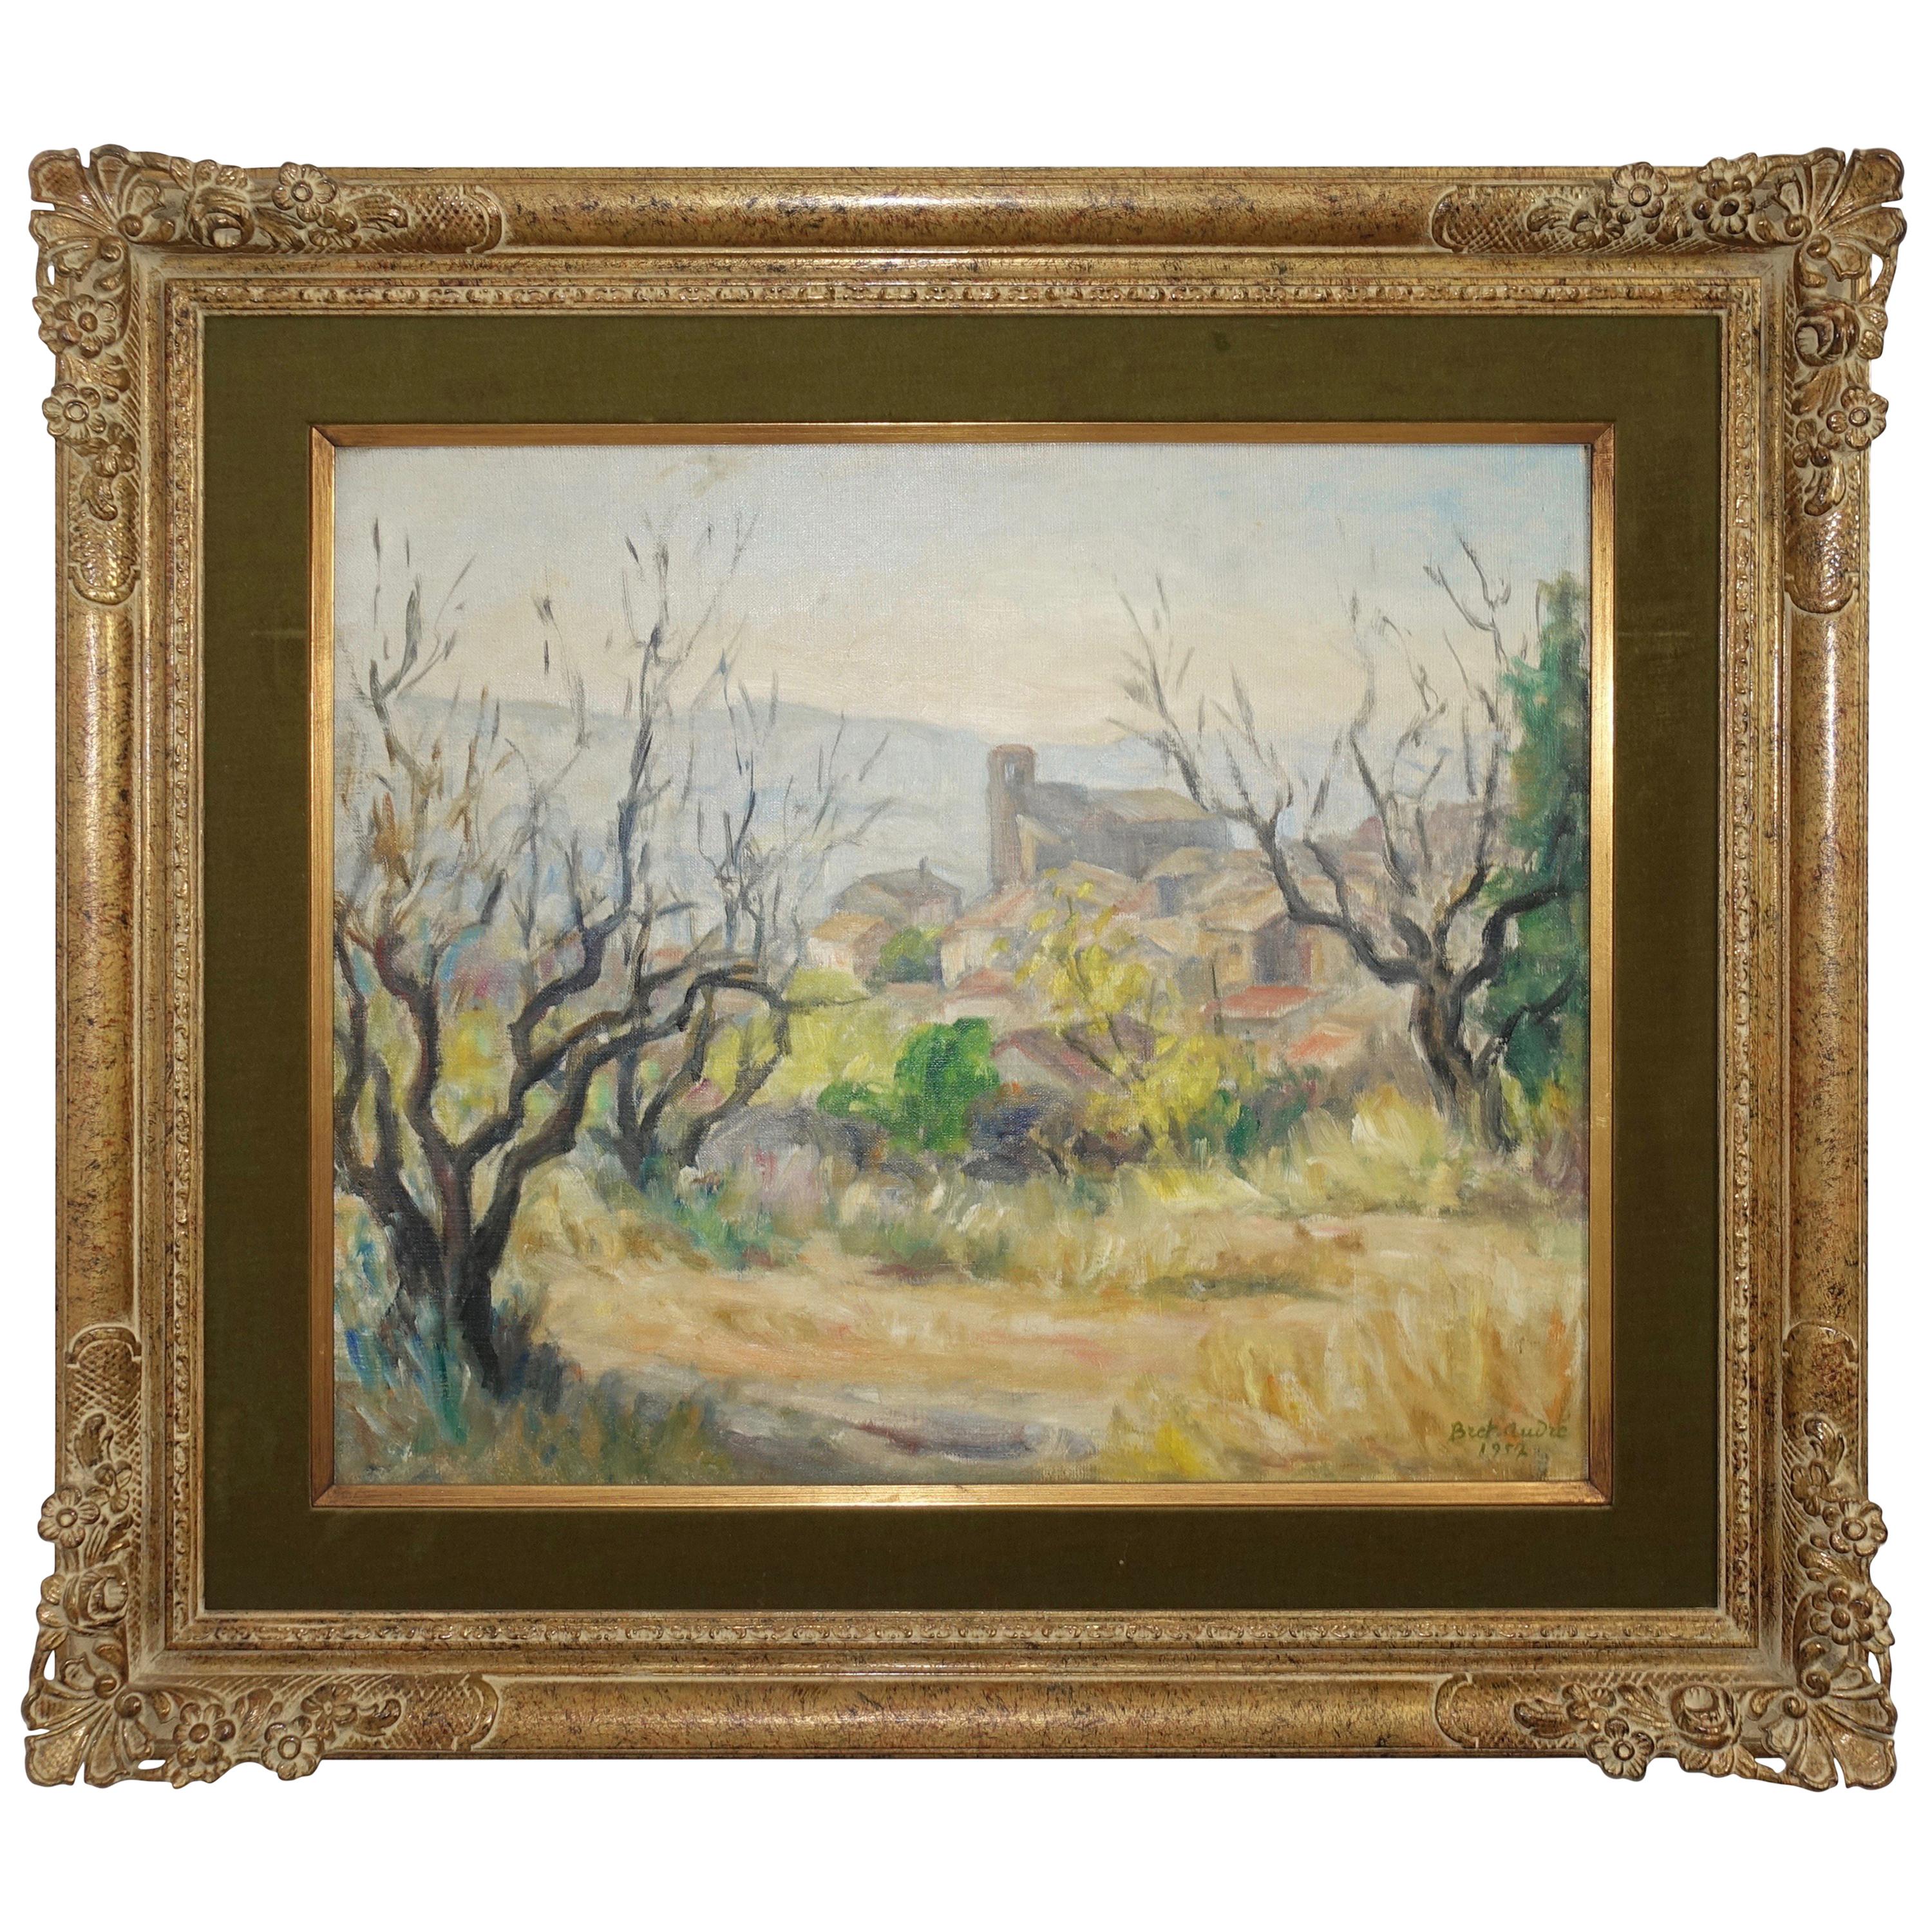 French Impressionist Landscape Painting, Signed Bret Andre, 1952